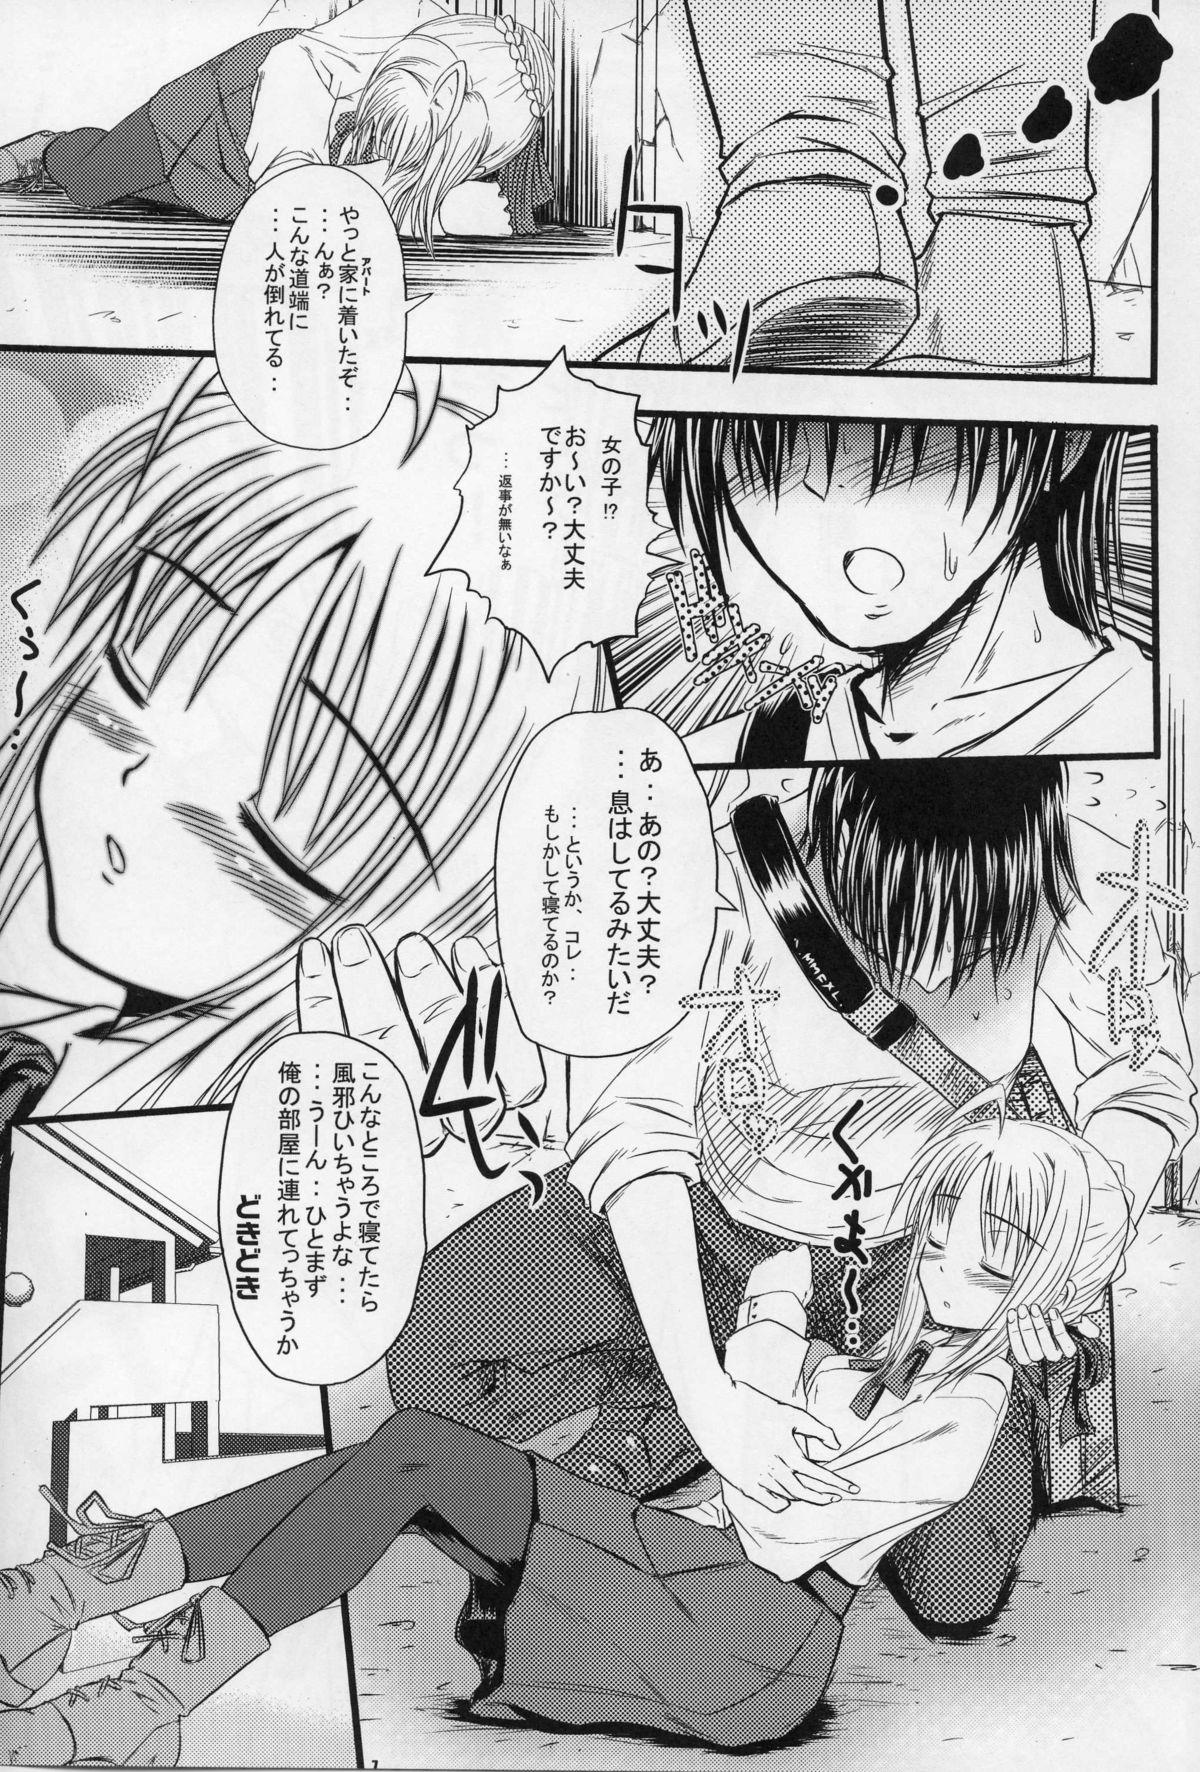 Dick Suck Saber of Stripes. - Fate stay night Fellatio - Page 4